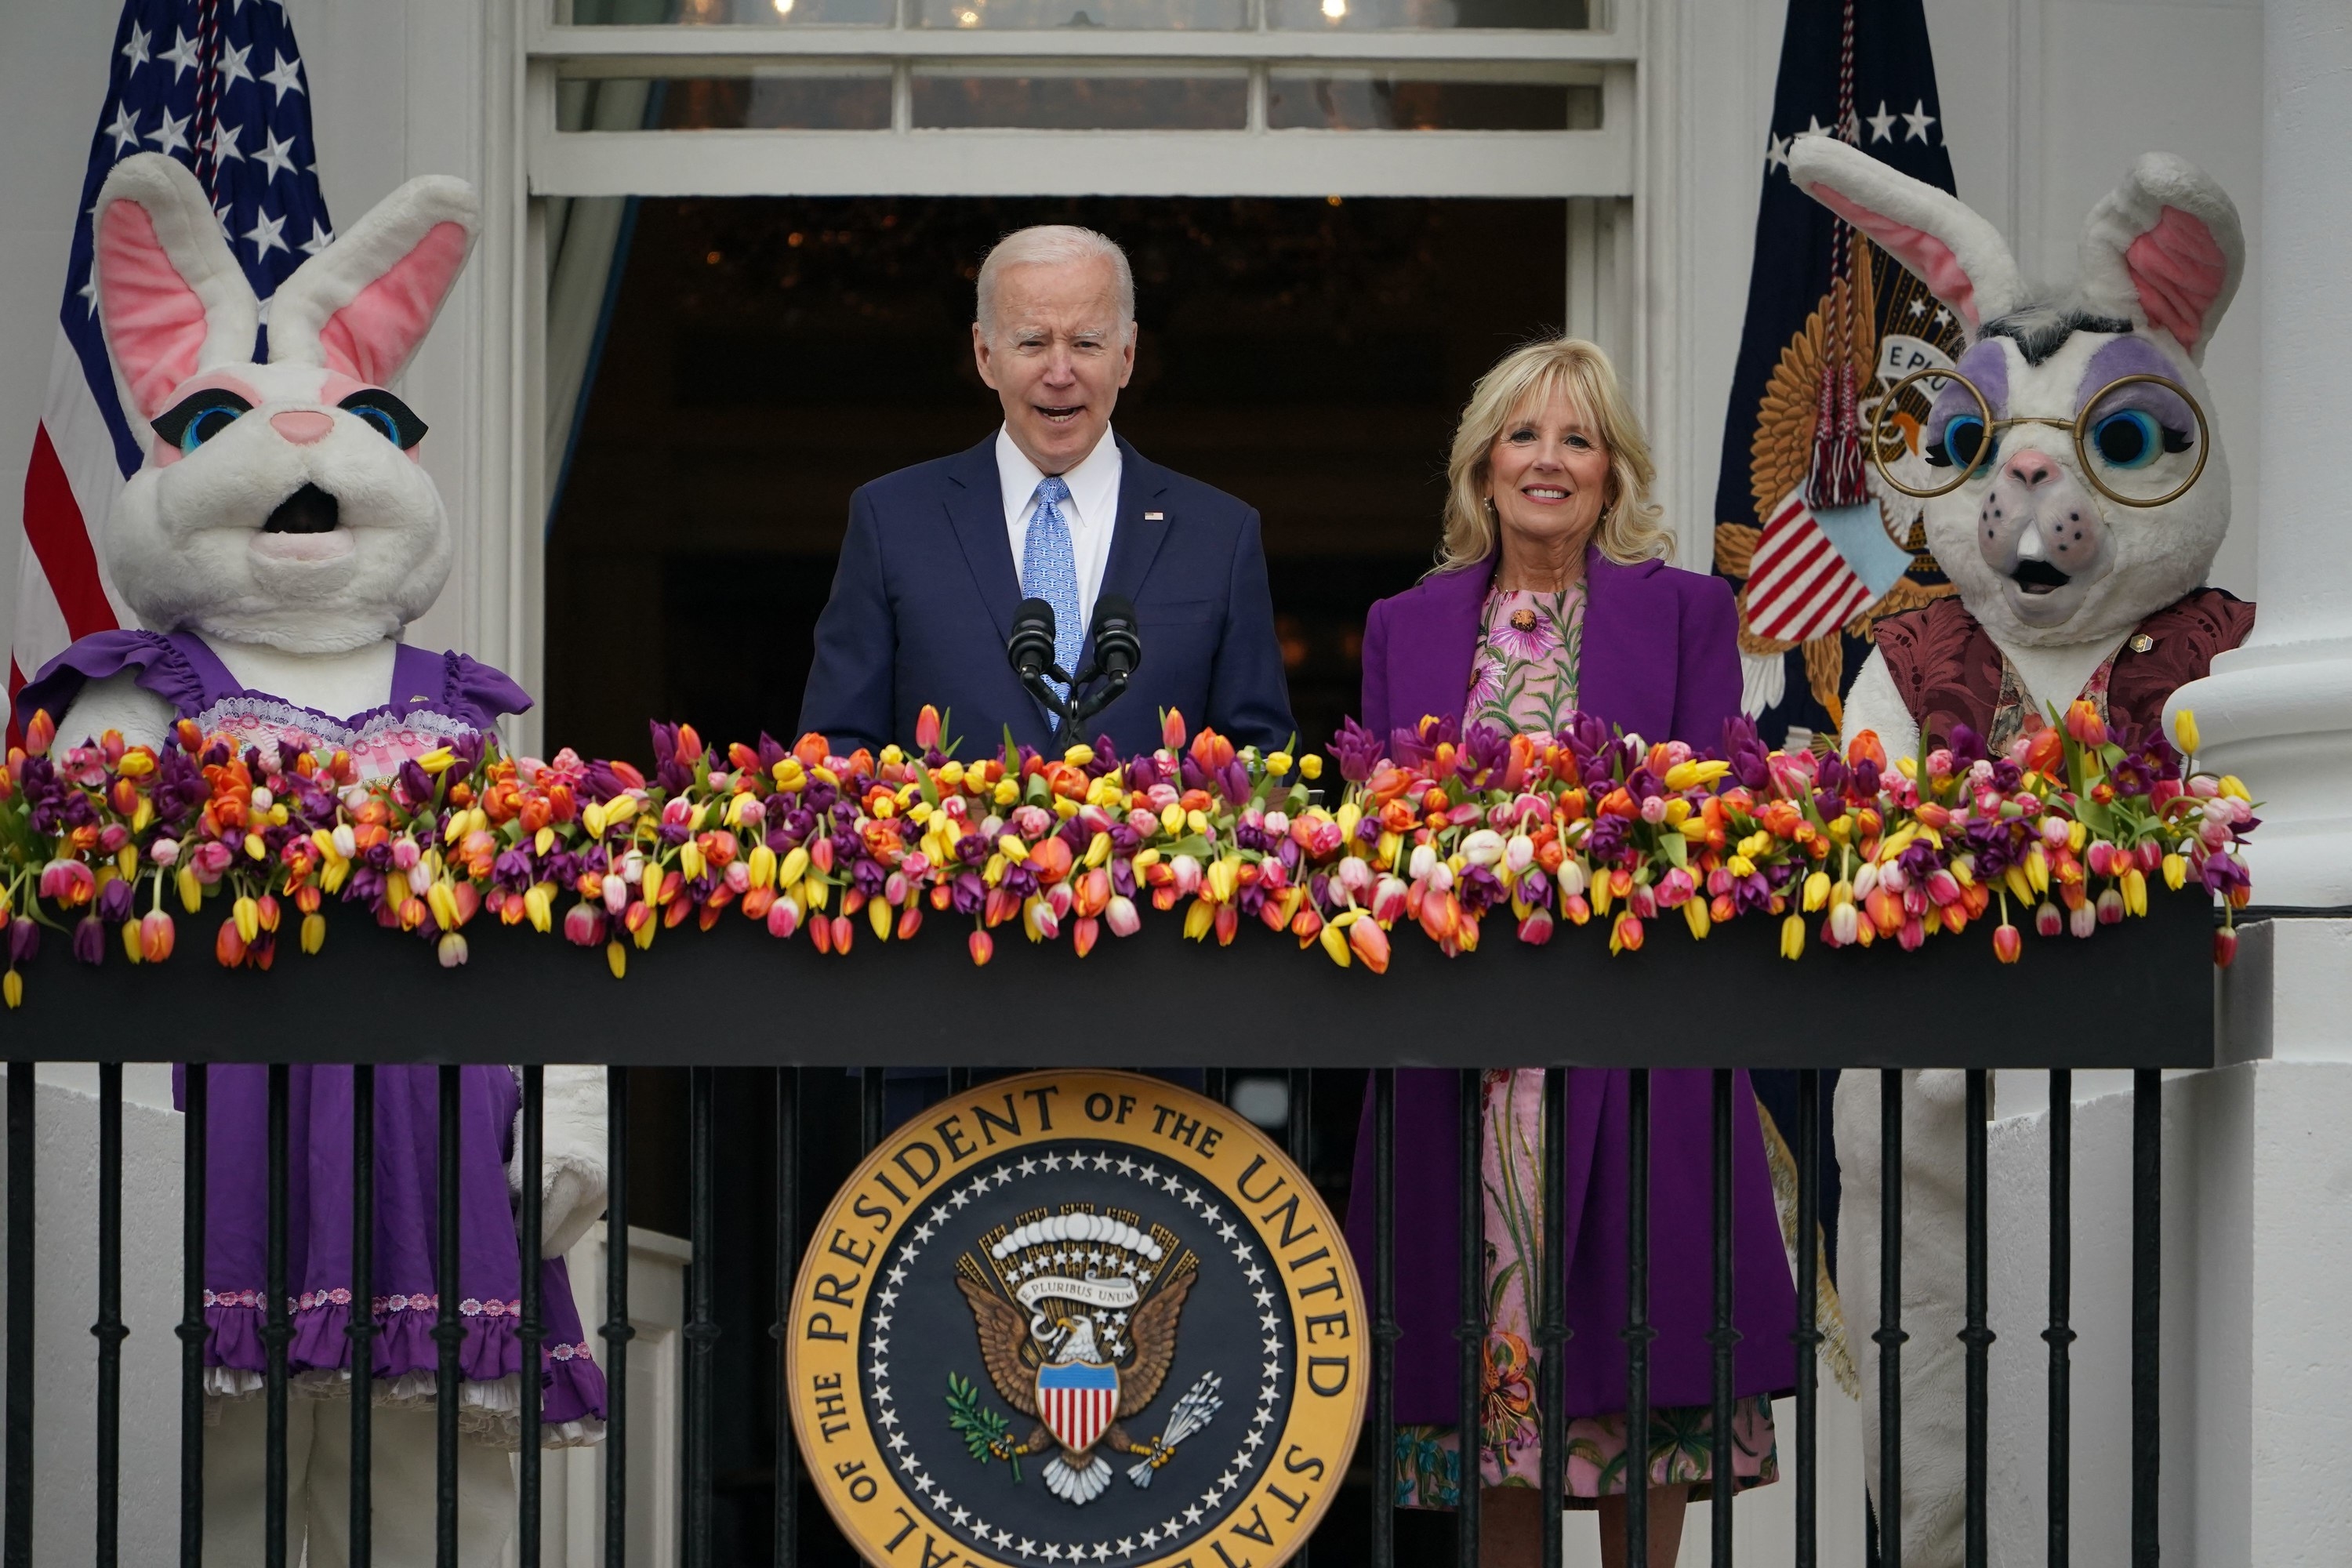 The Bidens speak while two giant costumed bunnies look on